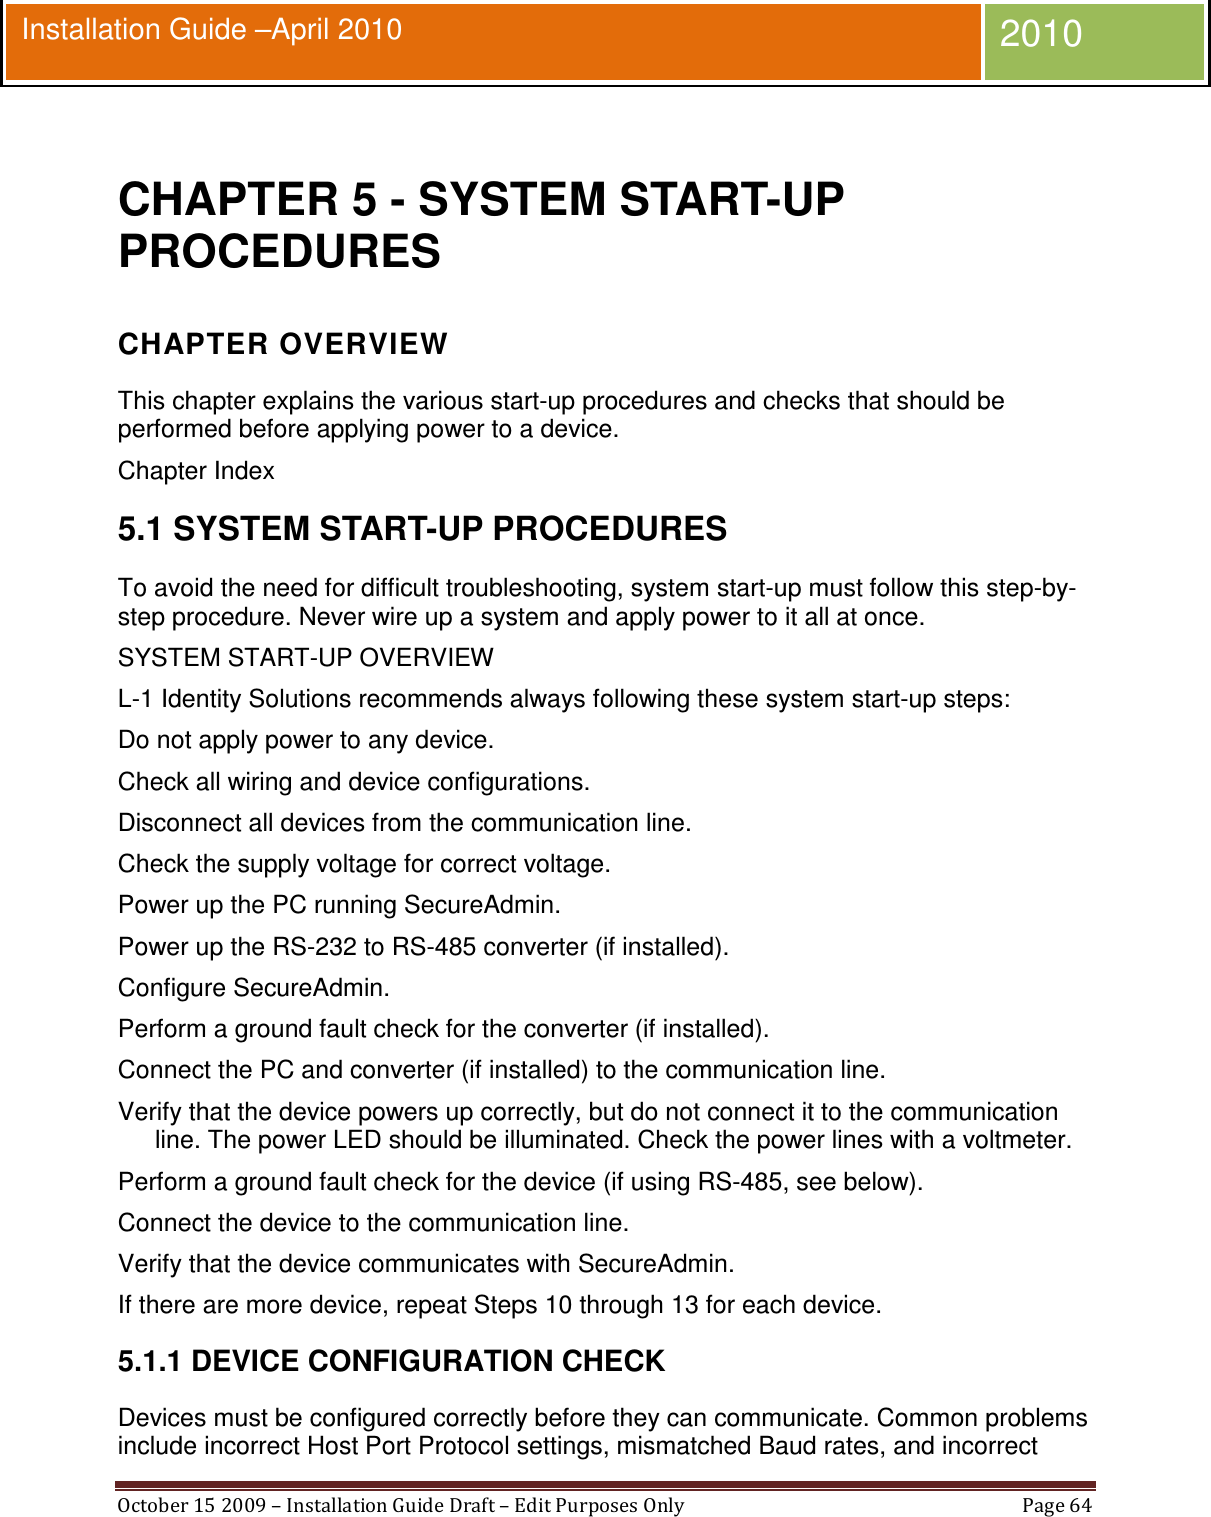  October 15 2009 – Installation Guide Draft – Edit Purposes Only  Page 64  Installation Guide –April 2010 2010  CHAPTER 5 - SYSTEM START-UP PROCEDURES CHAPTER OVERVIEW This chapter explains the various start-up procedures and checks that should be performed before applying power to a device. Chapter Index 5.1 SYSTEM START-UP PROCEDURES To avoid the need for difficult troubleshooting, system start-up must follow this step-by-step procedure. Never wire up a system and apply power to it all at once. SYSTEM START-UP OVERVIEW L-1 Identity Solutions recommends always following these system start-up steps: Do not apply power to any device. Check all wiring and device configurations. Disconnect all devices from the communication line. Check the supply voltage for correct voltage. Power up the PC running SecureAdmin. Power up the RS-232 to RS-485 converter (if installed). Configure SecureAdmin. Perform a ground fault check for the converter (if installed). Connect the PC and converter (if installed) to the communication line. Verify that the device powers up correctly, but do not connect it to the communication line. The power LED should be illuminated. Check the power lines with a voltmeter. Perform a ground fault check for the device (if using RS-485, see below). Connect the device to the communication line. Verify that the device communicates with SecureAdmin. If there are more device, repeat Steps 10 through 13 for each device. 5.1.1 DEVICE CONFIGURATION CHECK Devices must be configured correctly before they can communicate. Common problems include incorrect Host Port Protocol settings, mismatched Baud rates, and incorrect 